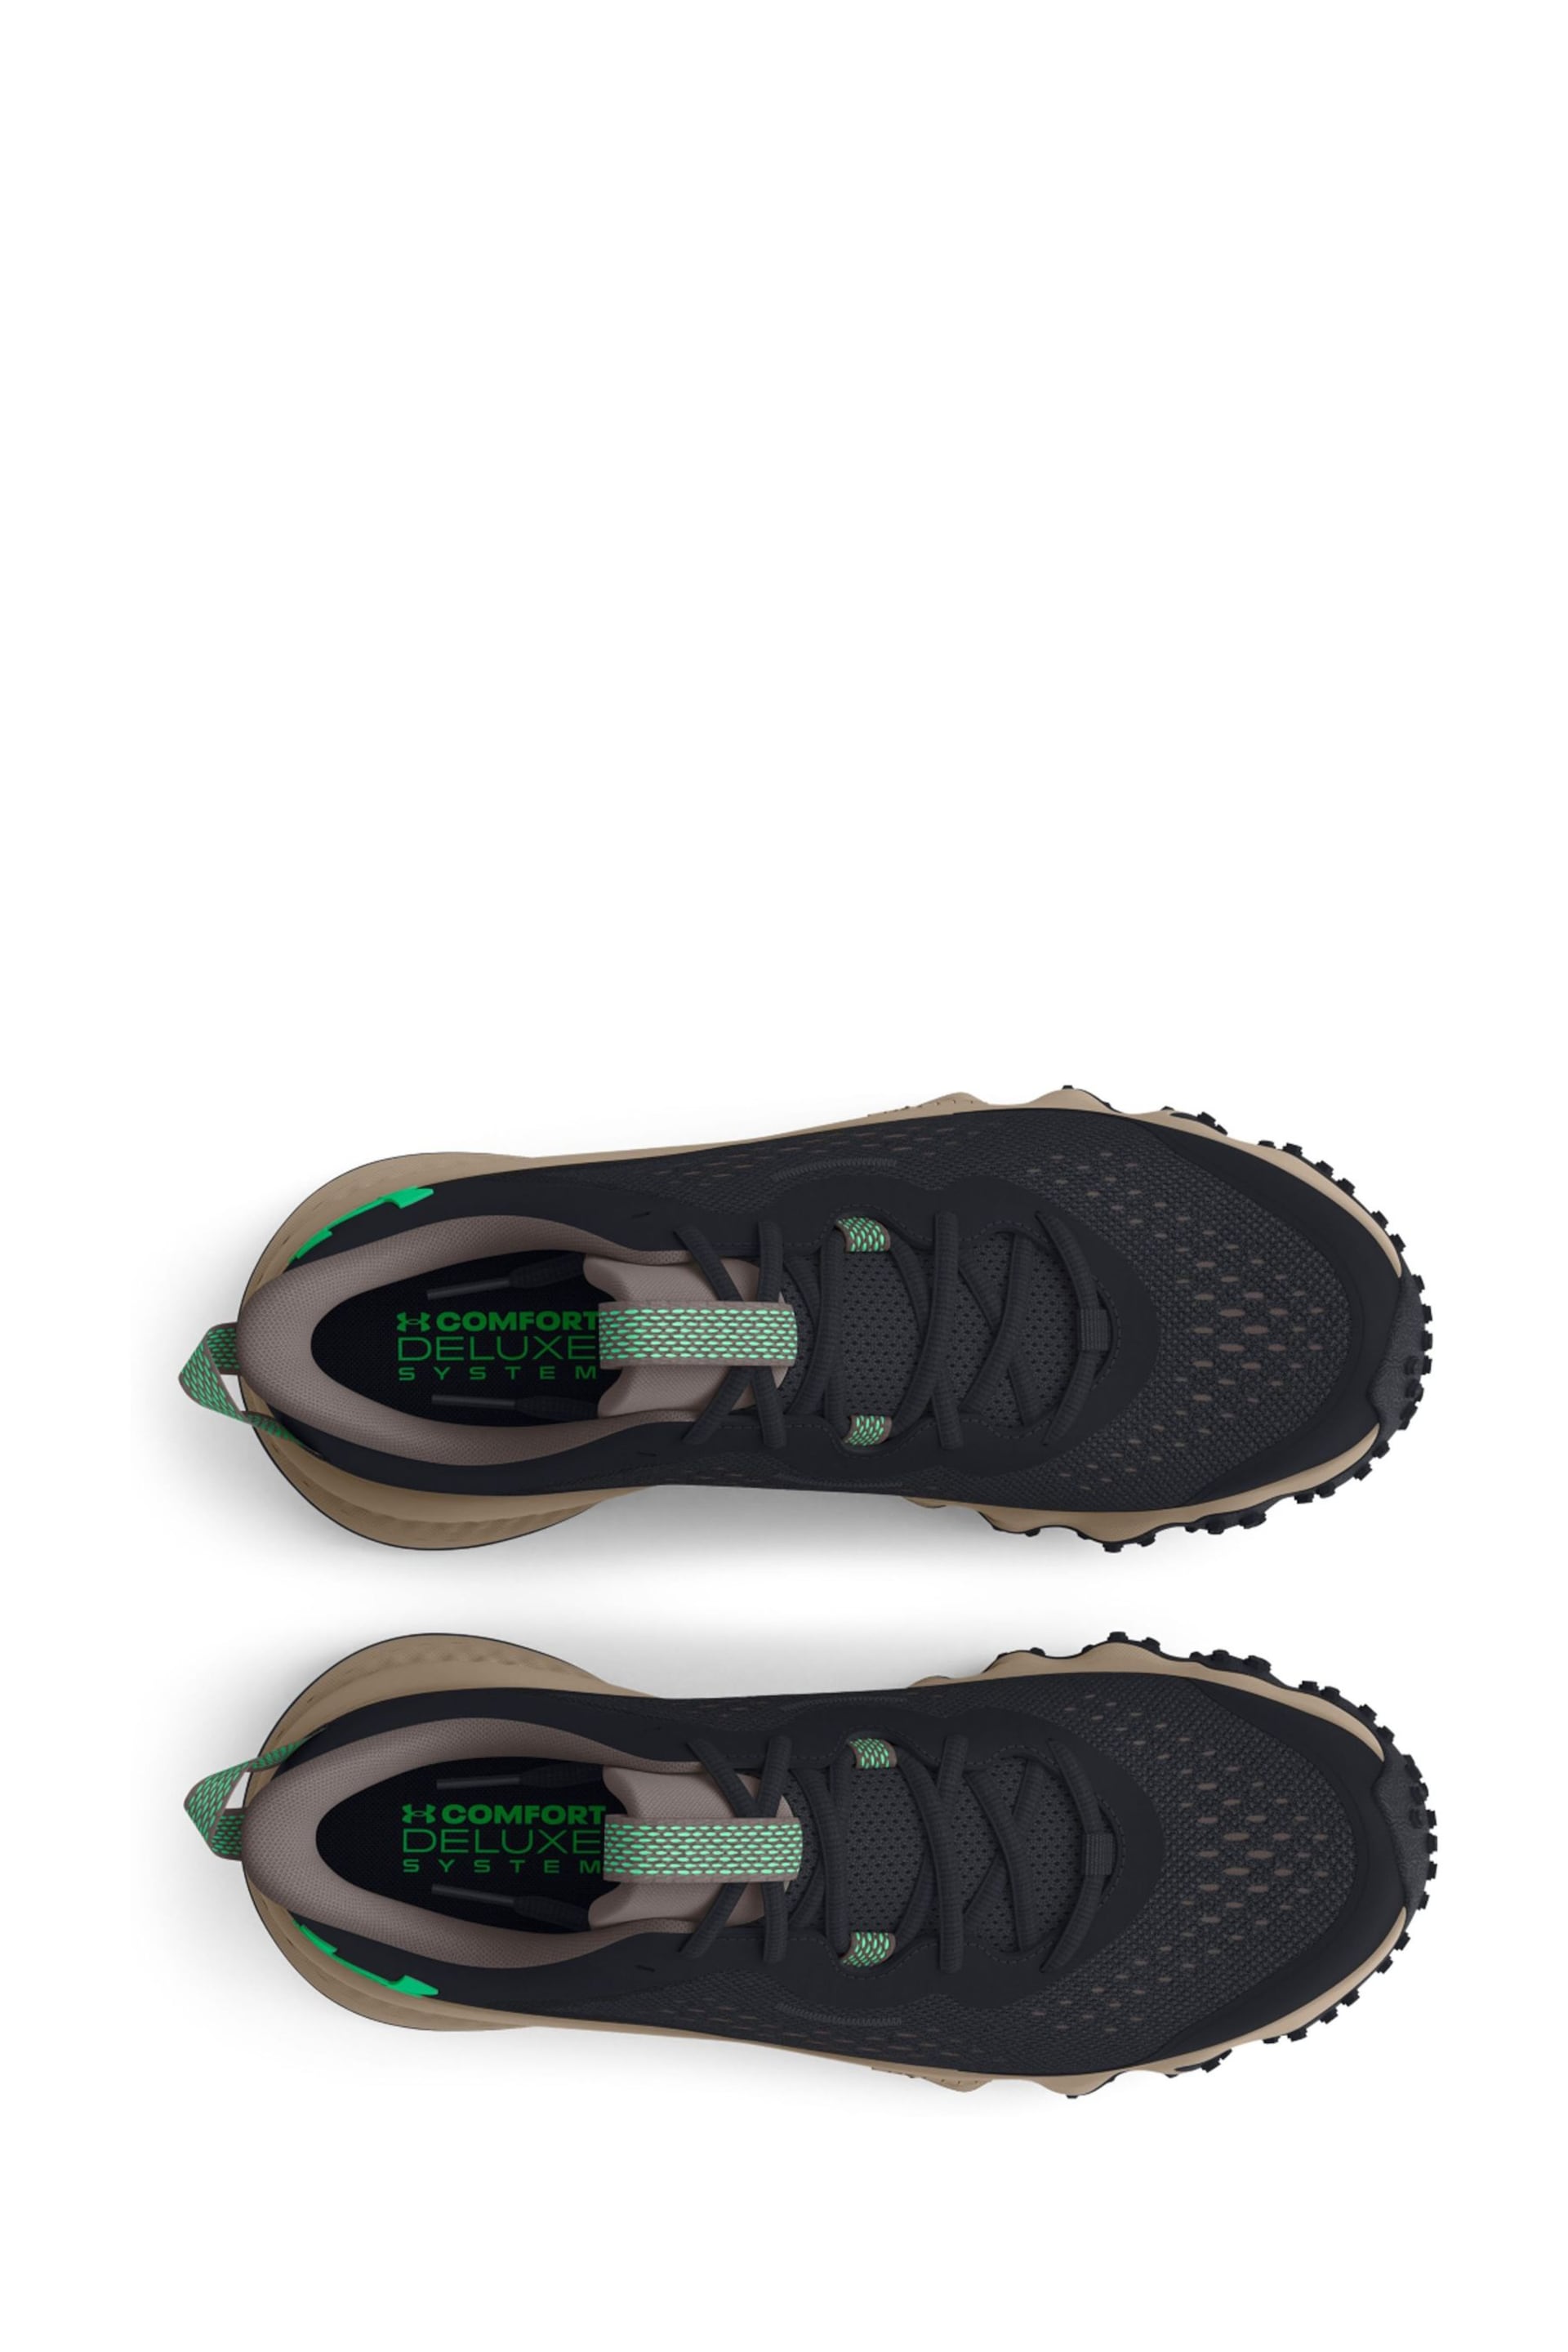 Under Armour Charged Maven Trail Black Trainers - Image 4 of 7